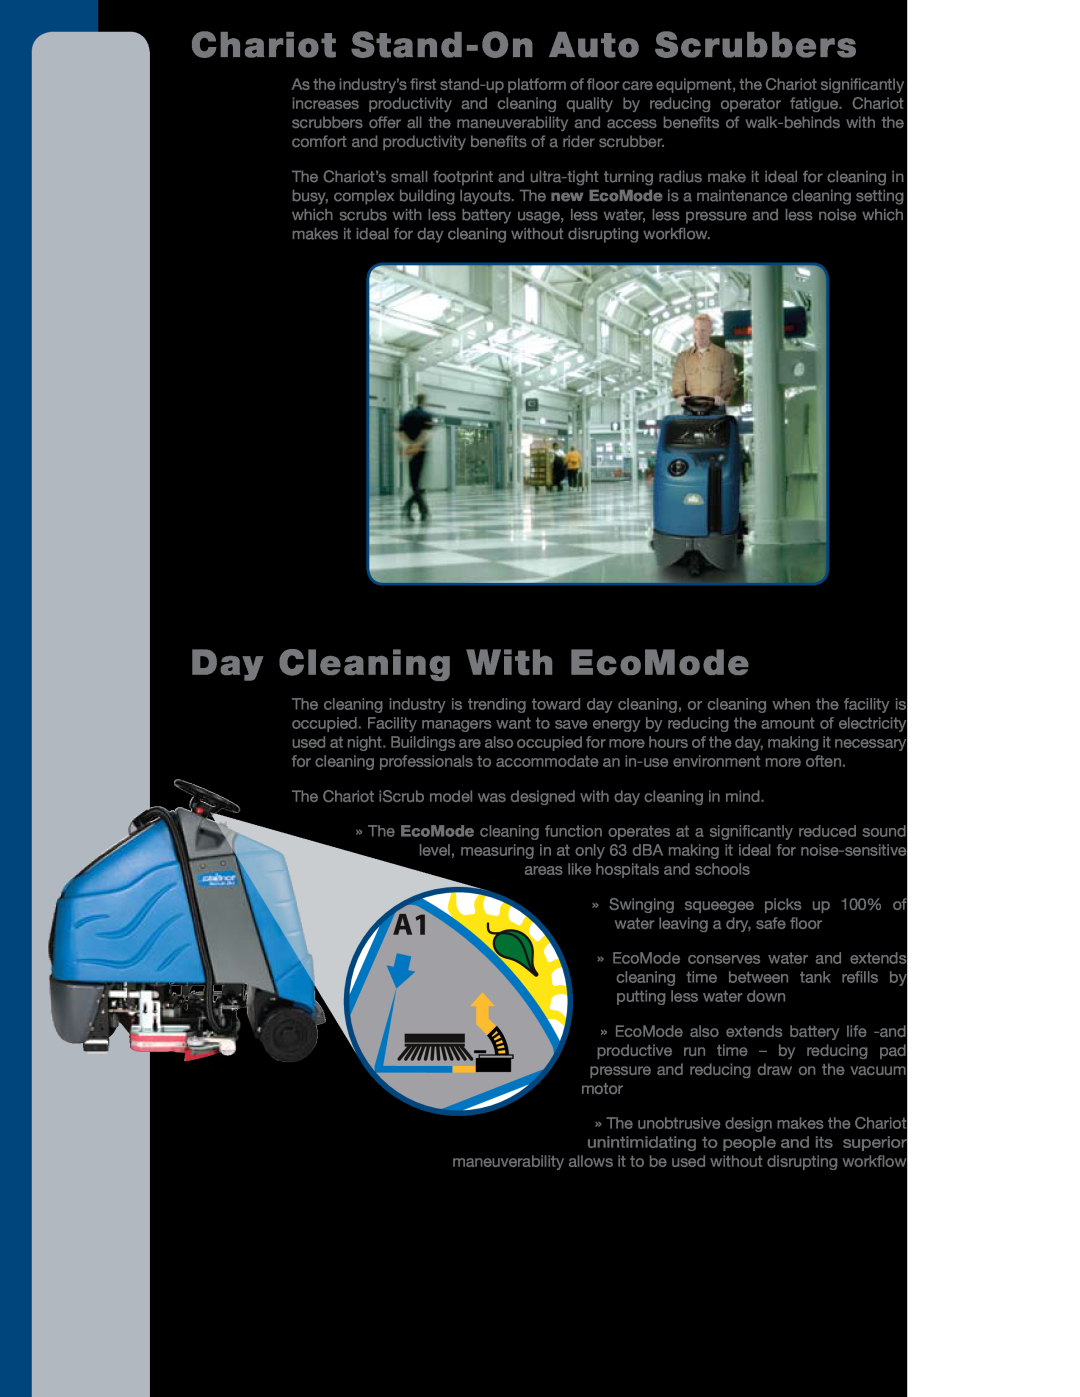 Windsor Chariot iScrub manual Chariot Stand-On Auto Scrubbers, Day Cleaning With EcoMode 